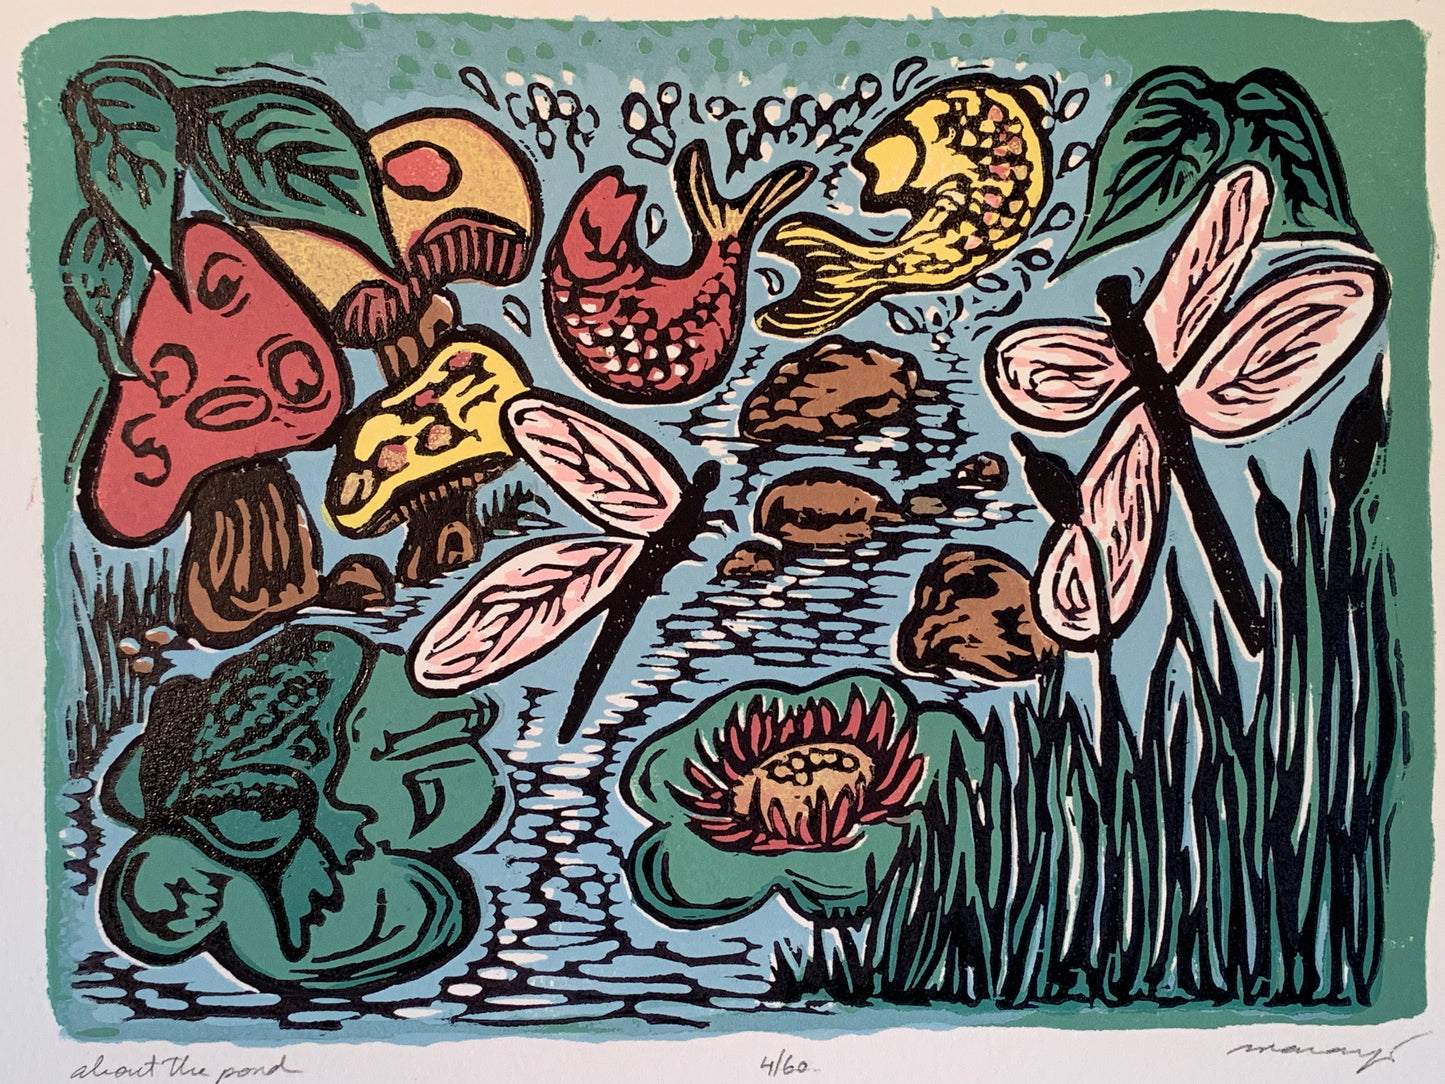 Bright Color Original Woodcut About the Pond Child Art Frog Fish Dragonfly